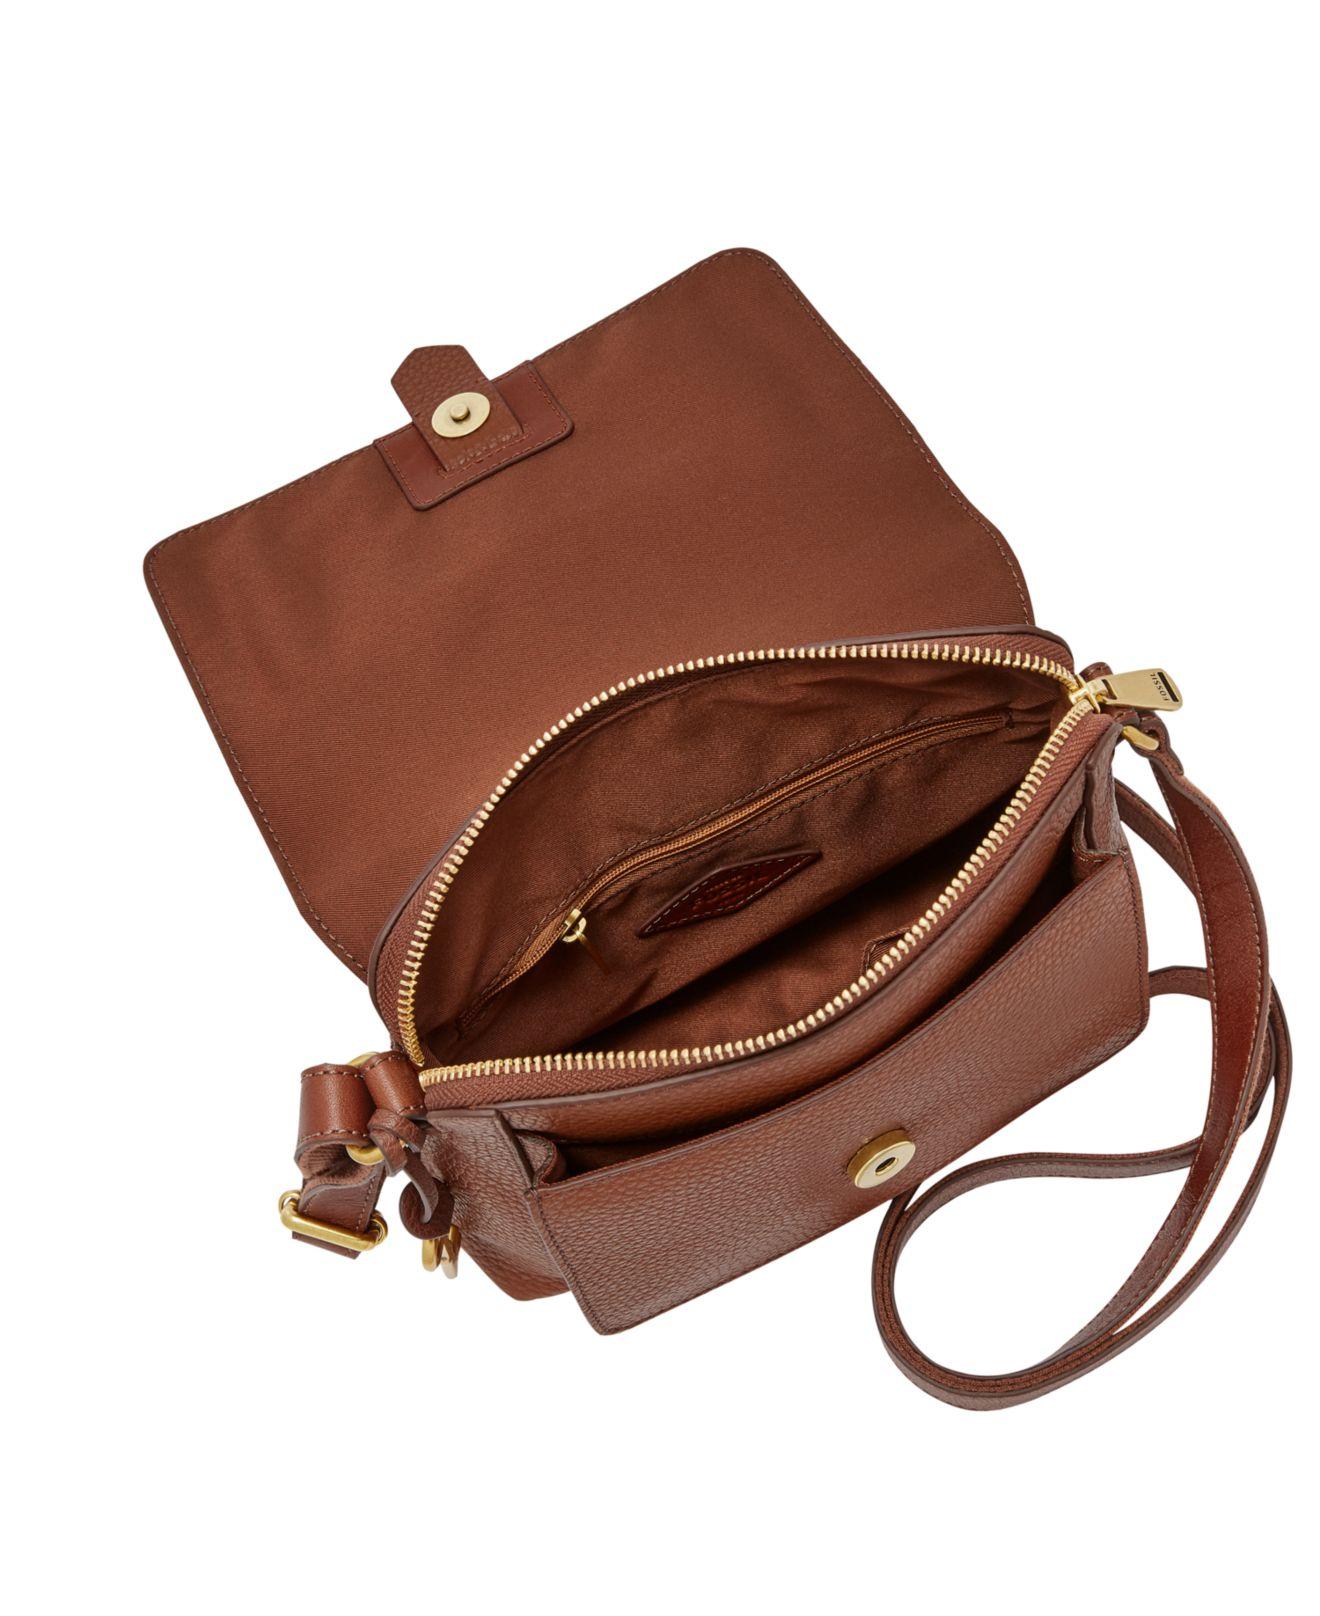 Fossil Ladies Kinley Small Leather Crossbody Bag - Brown | NAR Media Kit